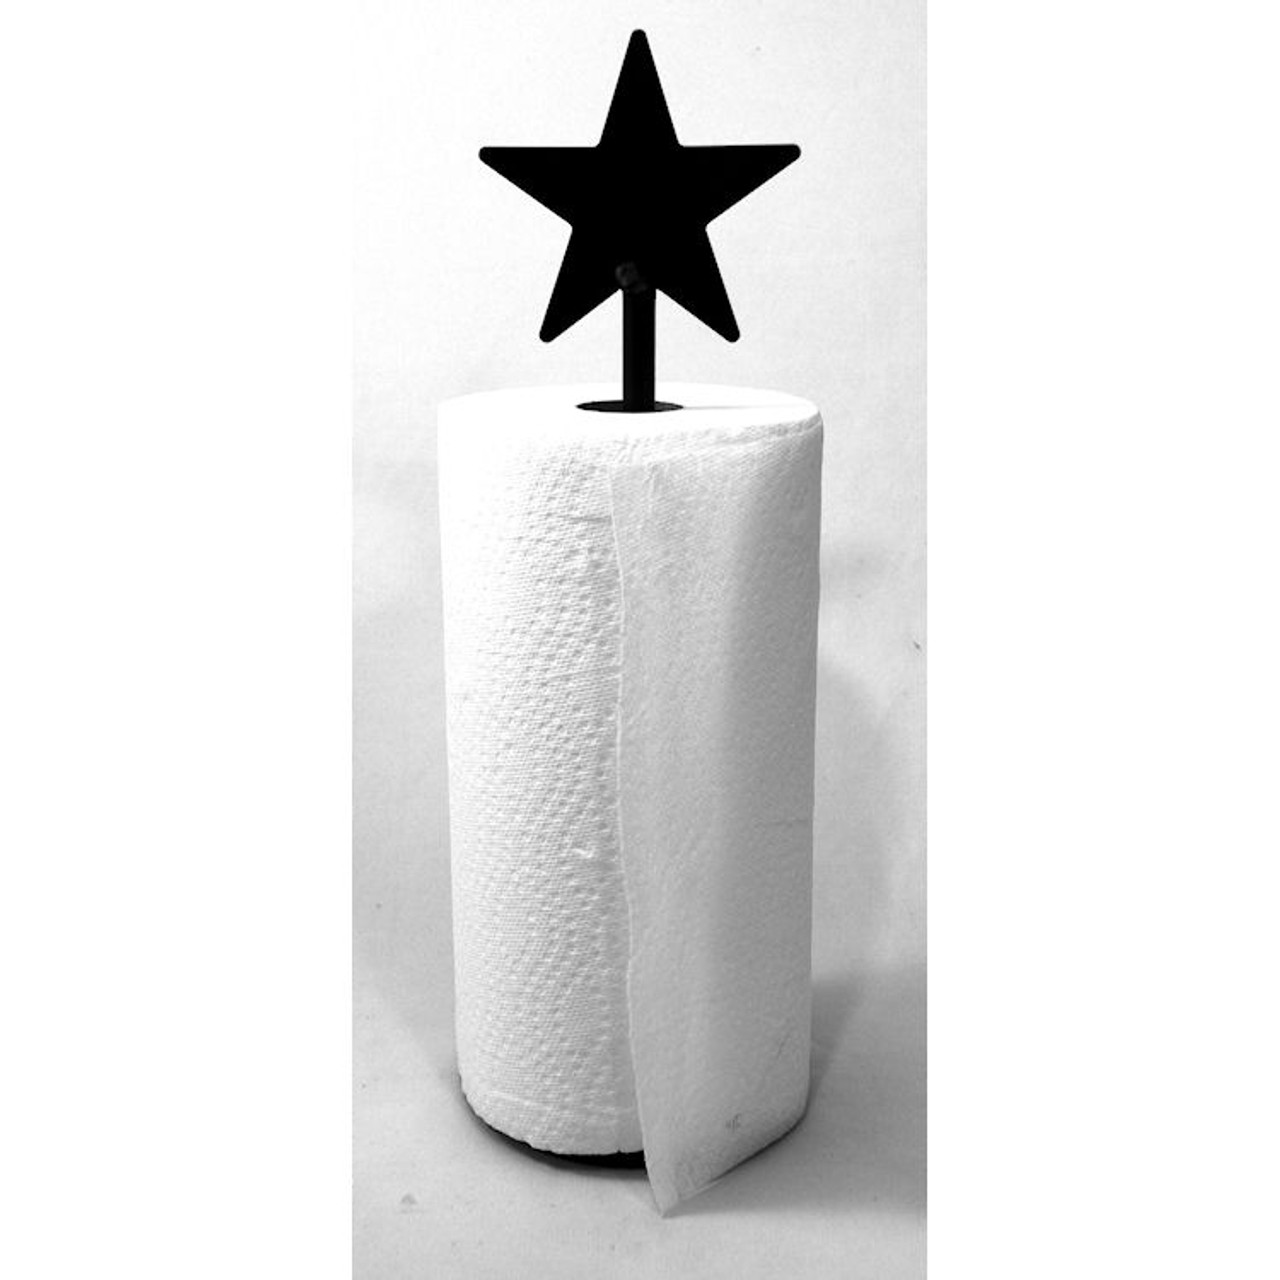 https://cdn11.bigcommerce.com/s-t9h6v/images/stencil/1280x1280/products/6297/8200/amish_iron_star_paper_towel_holder_display__62339.1612037277.jpg?c=2?imbypass=on